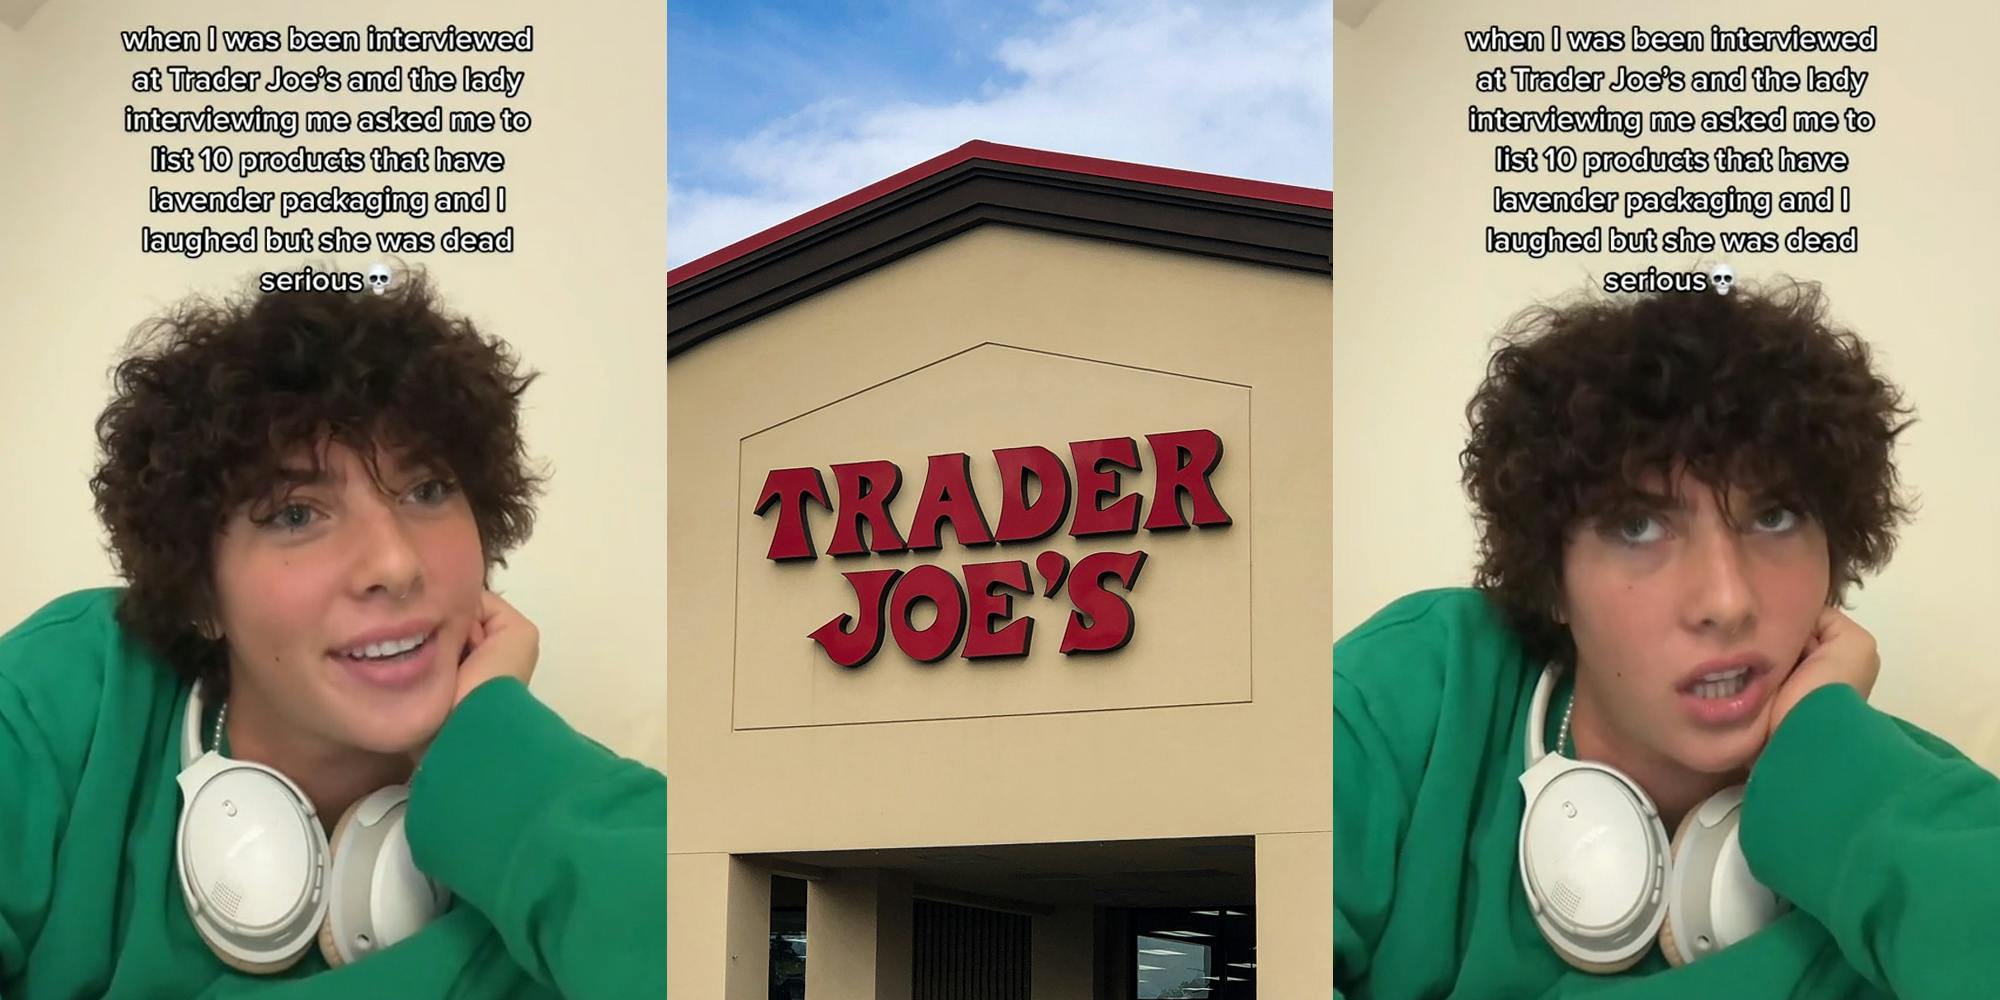 job hunter in front of tan background with caption "when I was interviewed at Trader Joe's and the lady interviewing me asked me to list 10 products that have lavender packaging and I laughed but she was dead serious" (l) Trader Joe's building with sign and blue sky (c) job hunter in front of tan background with caption "when I was interviewed at Trader Joe's and the lady interviewing me asked me to list 10 products that have lavender packaging and I laughed but she was dead serious" (r)